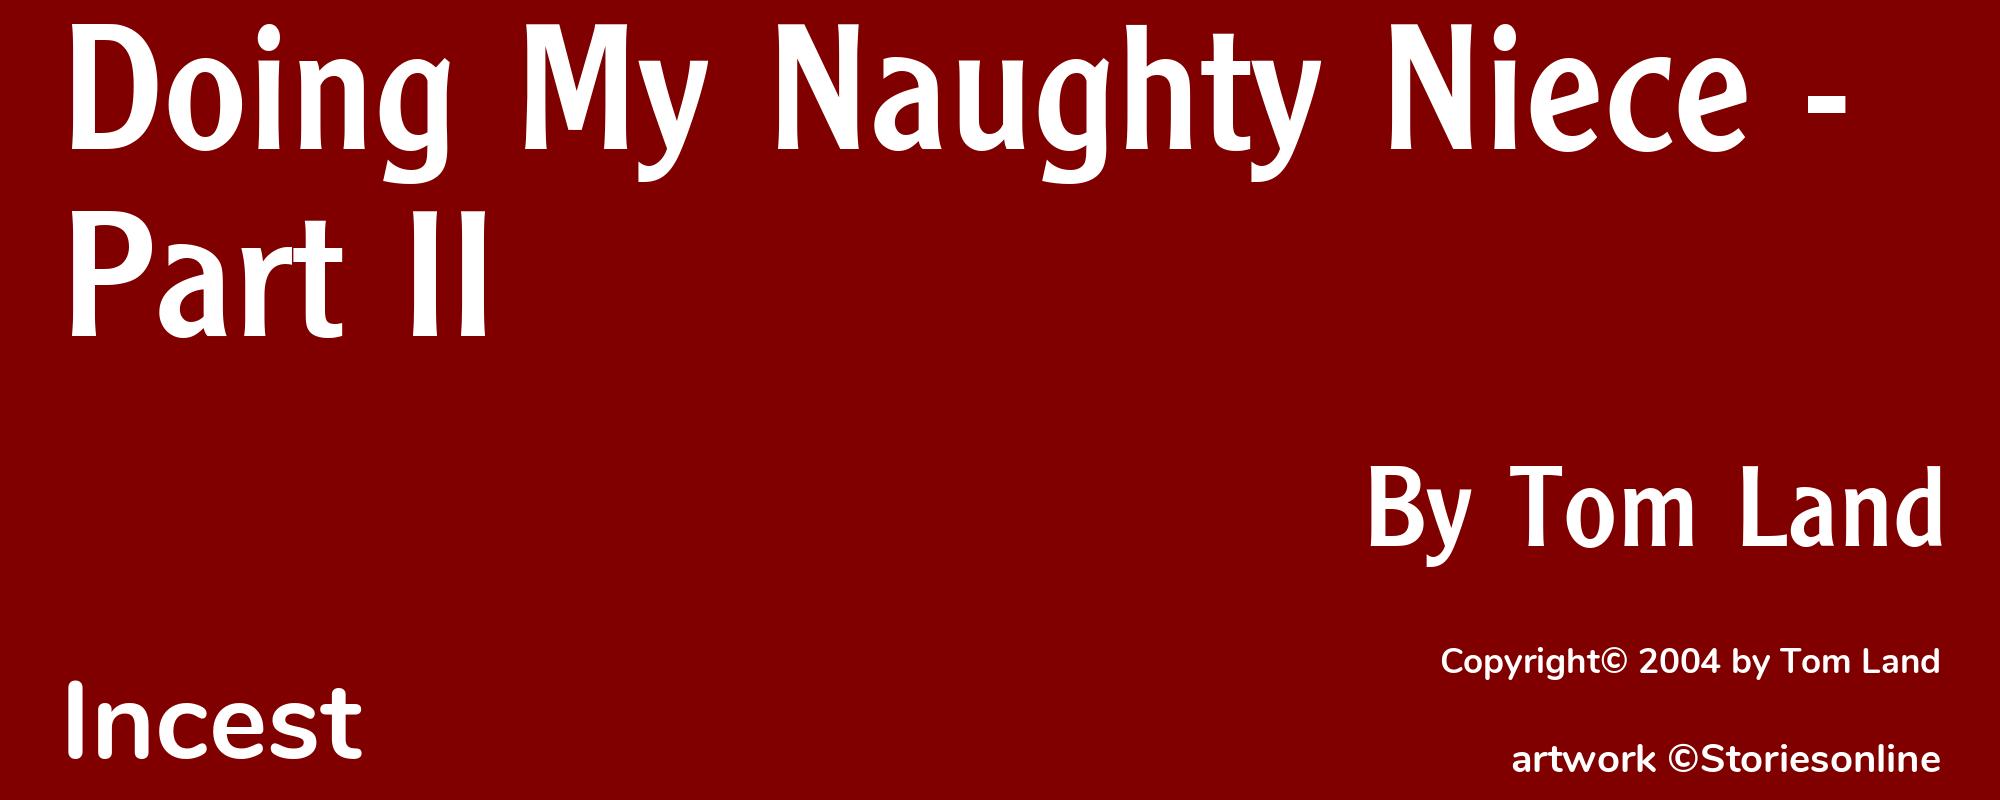 Doing My Naughty Niece - Part II - Cover